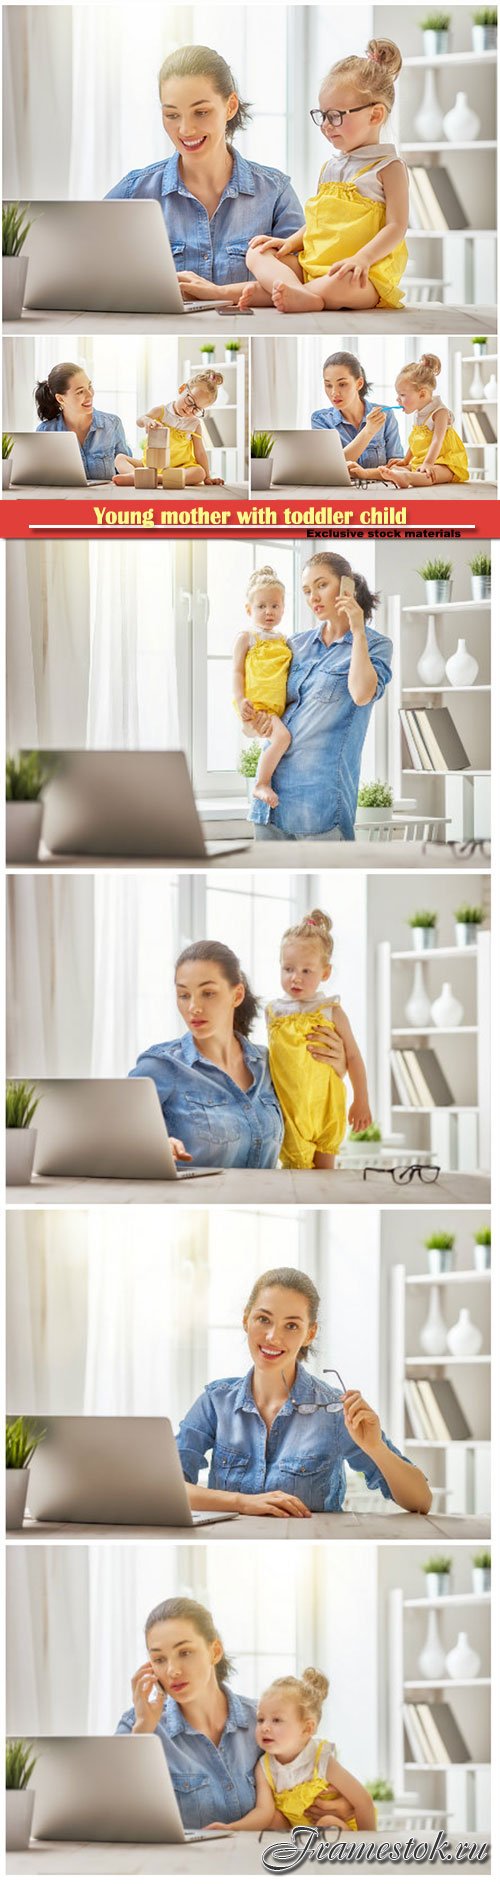 Young mother with toddler child working on the computer from home